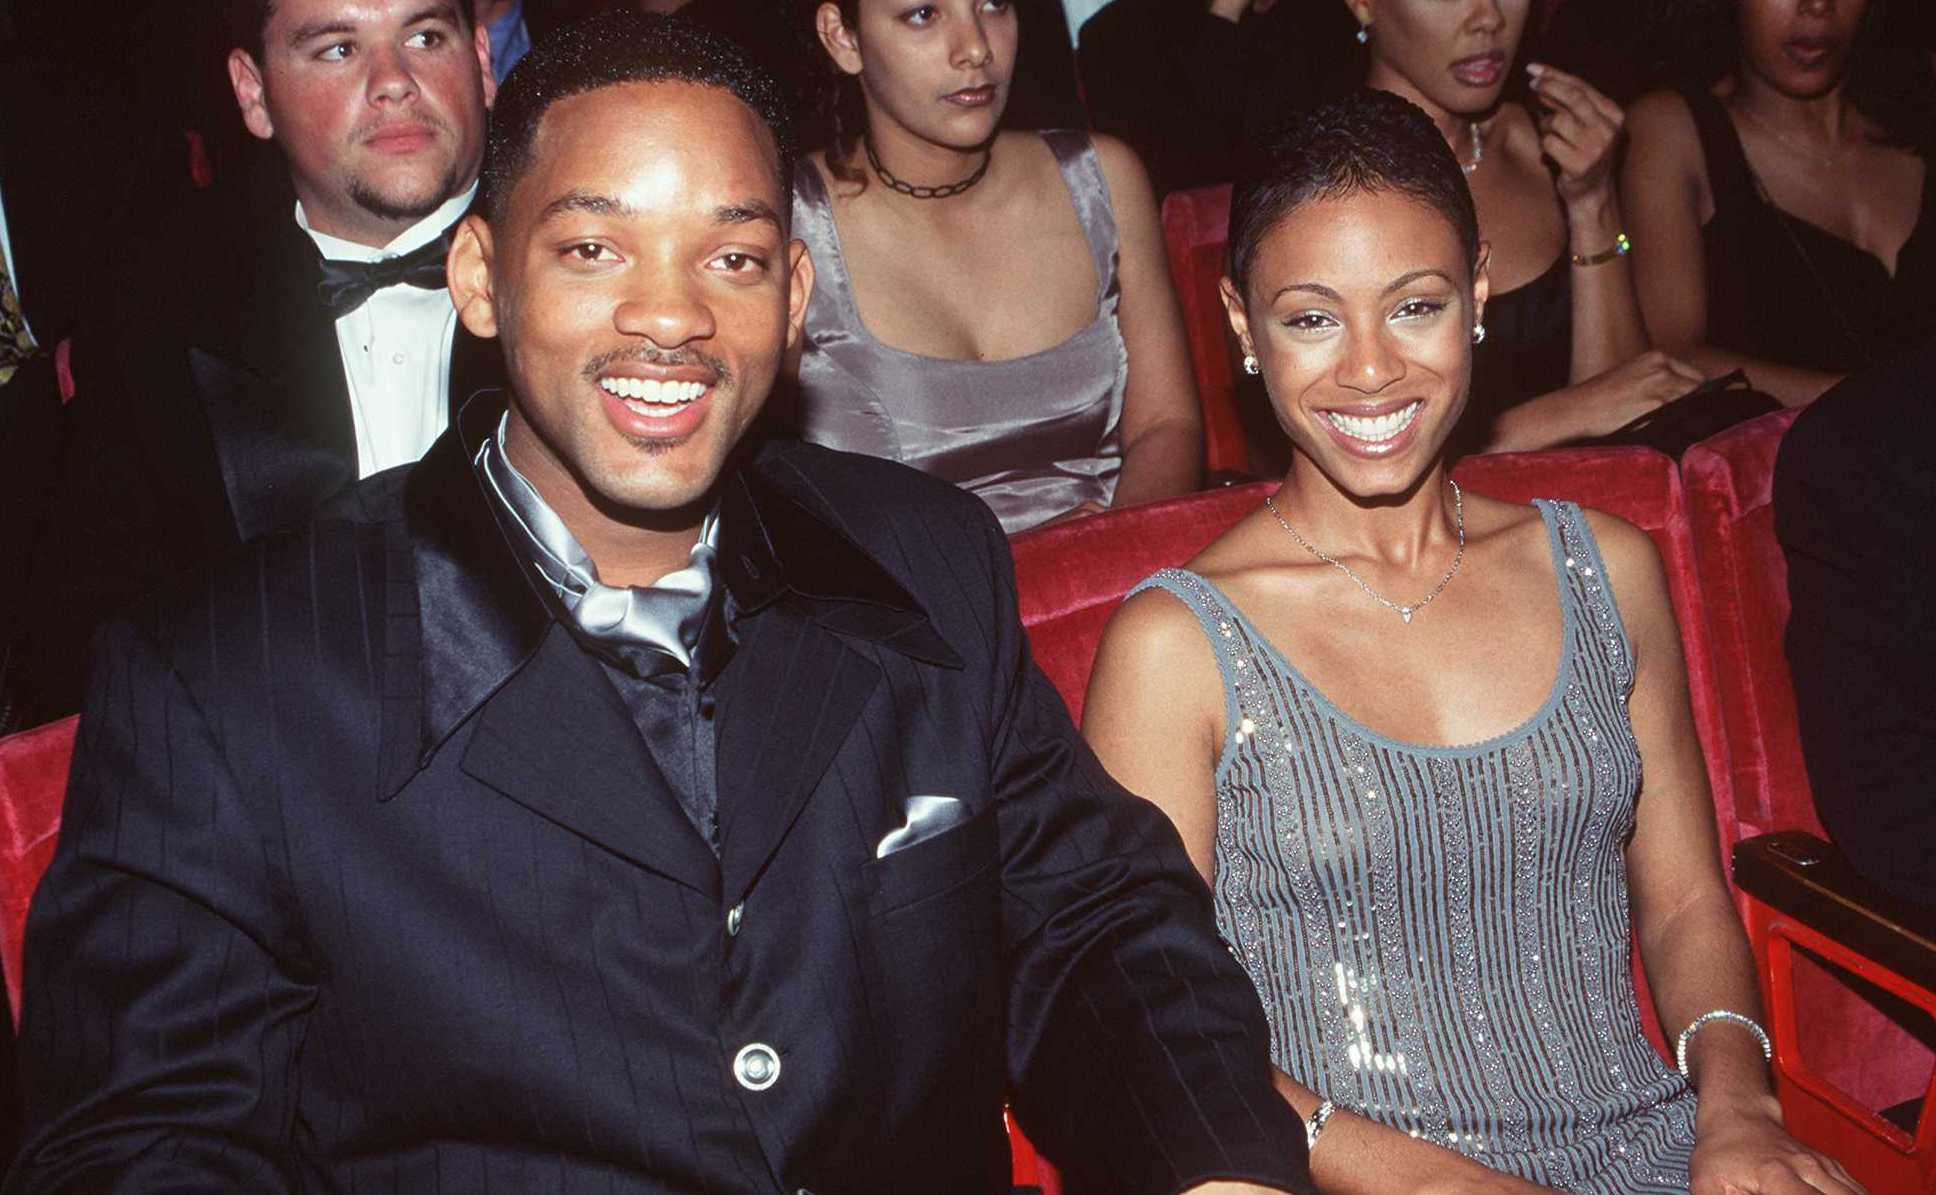 Jada Pinkett Smith 'hurt' Tupac when she asked him not to beat up Will Smith  years ago, friend claims